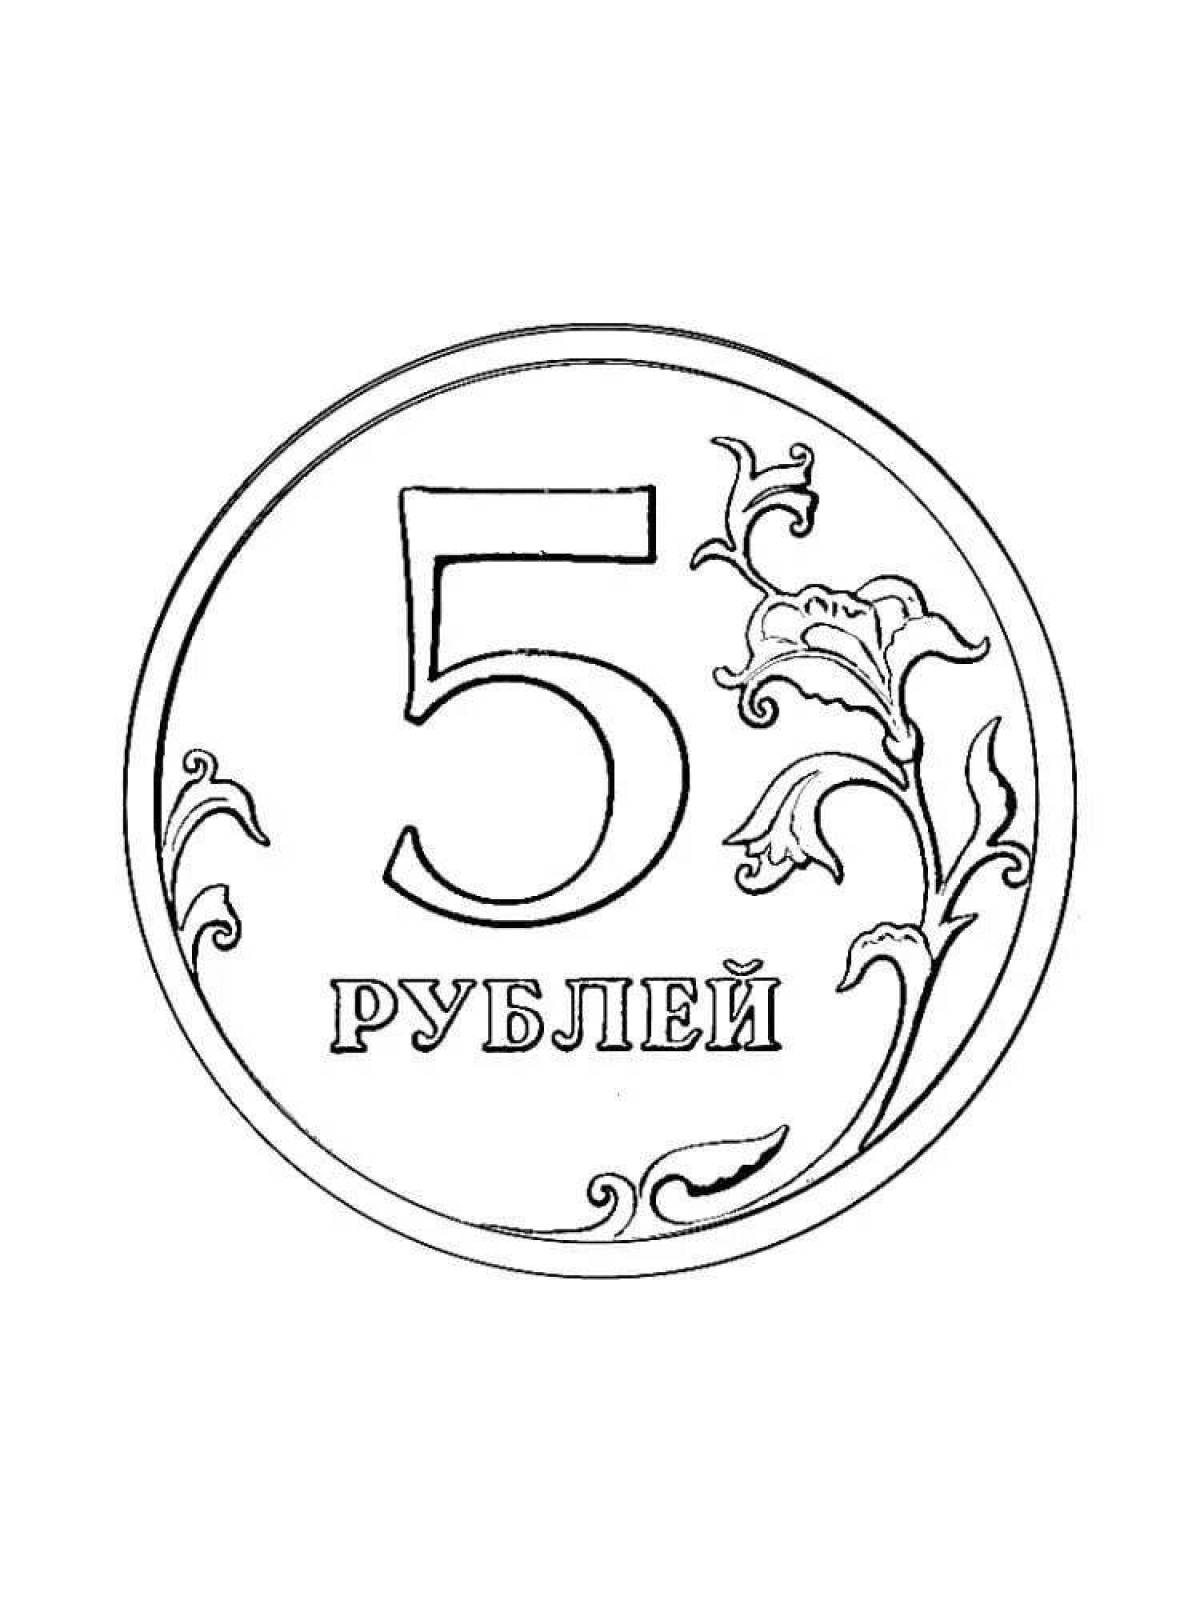 Bright 10 rubles coloring pages